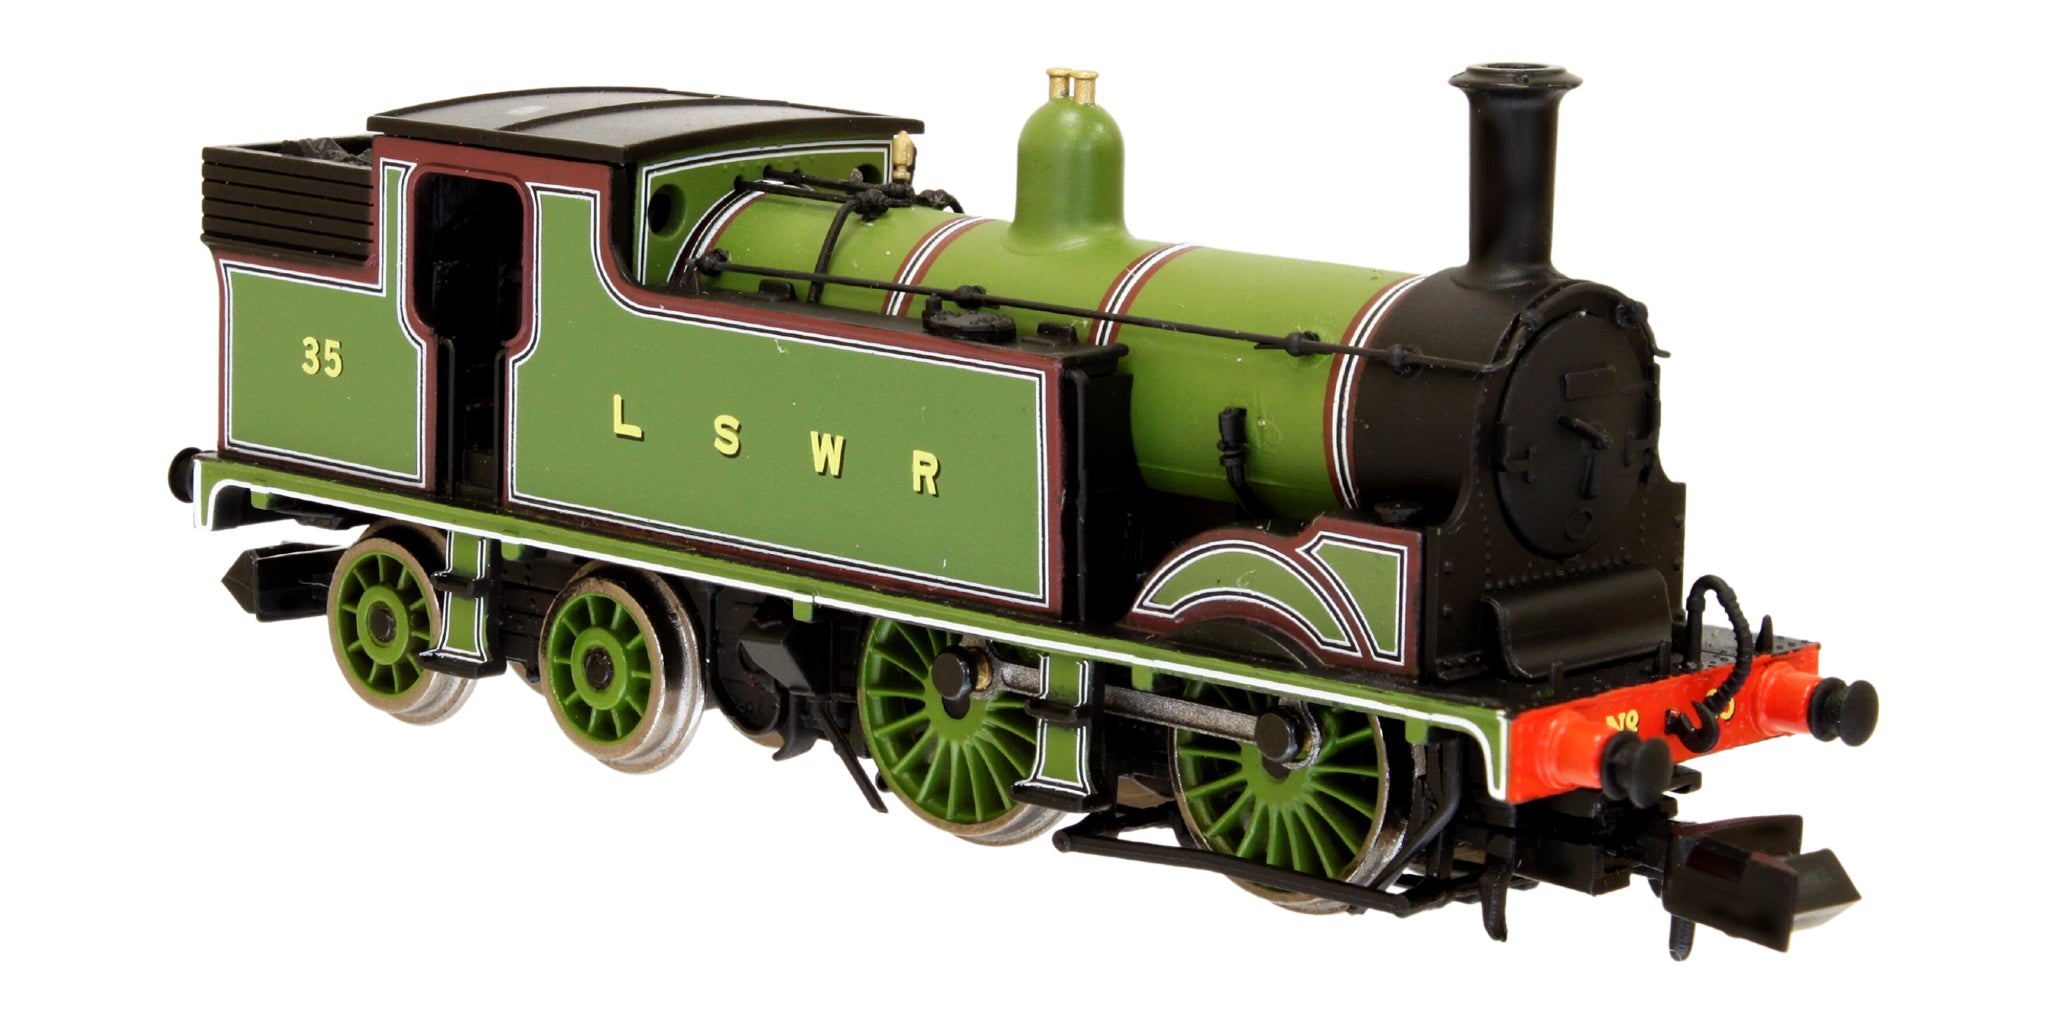 2S-016-012 N Gauge M7 0-4-4 LSWR Lined Green 35